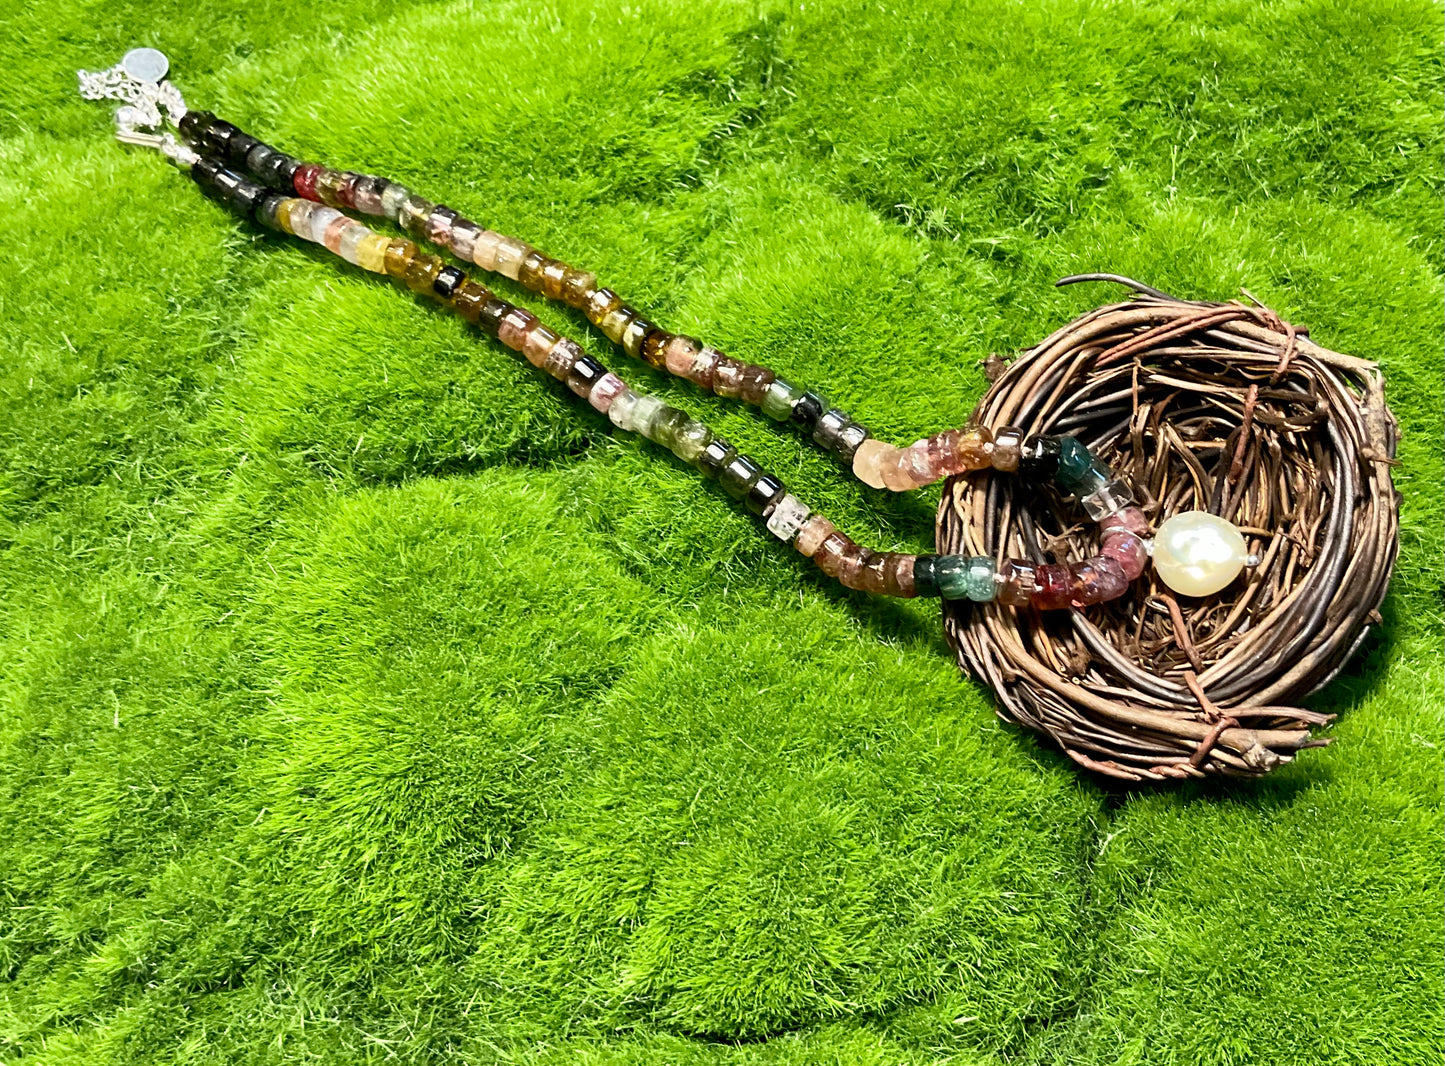 Tourmaline Hand-knotted Necklace with Pearl